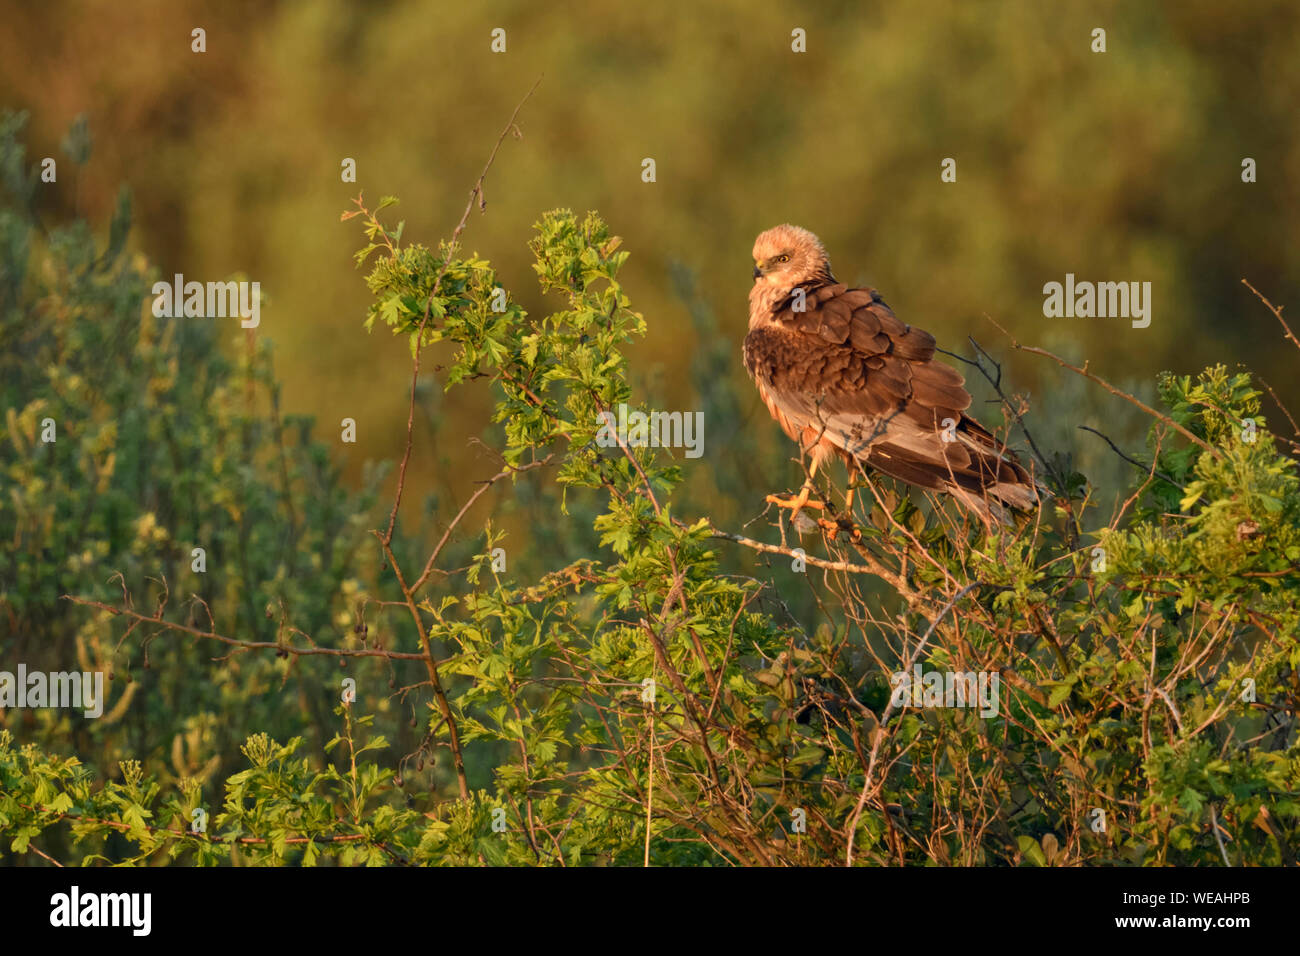 Western Marsh Harrier / Rohrweihe  ( Circus aeruginosus ), adult male, perched on top of some bushes, hunting for food, bird of prey, wildlife, Europe Stock Photo